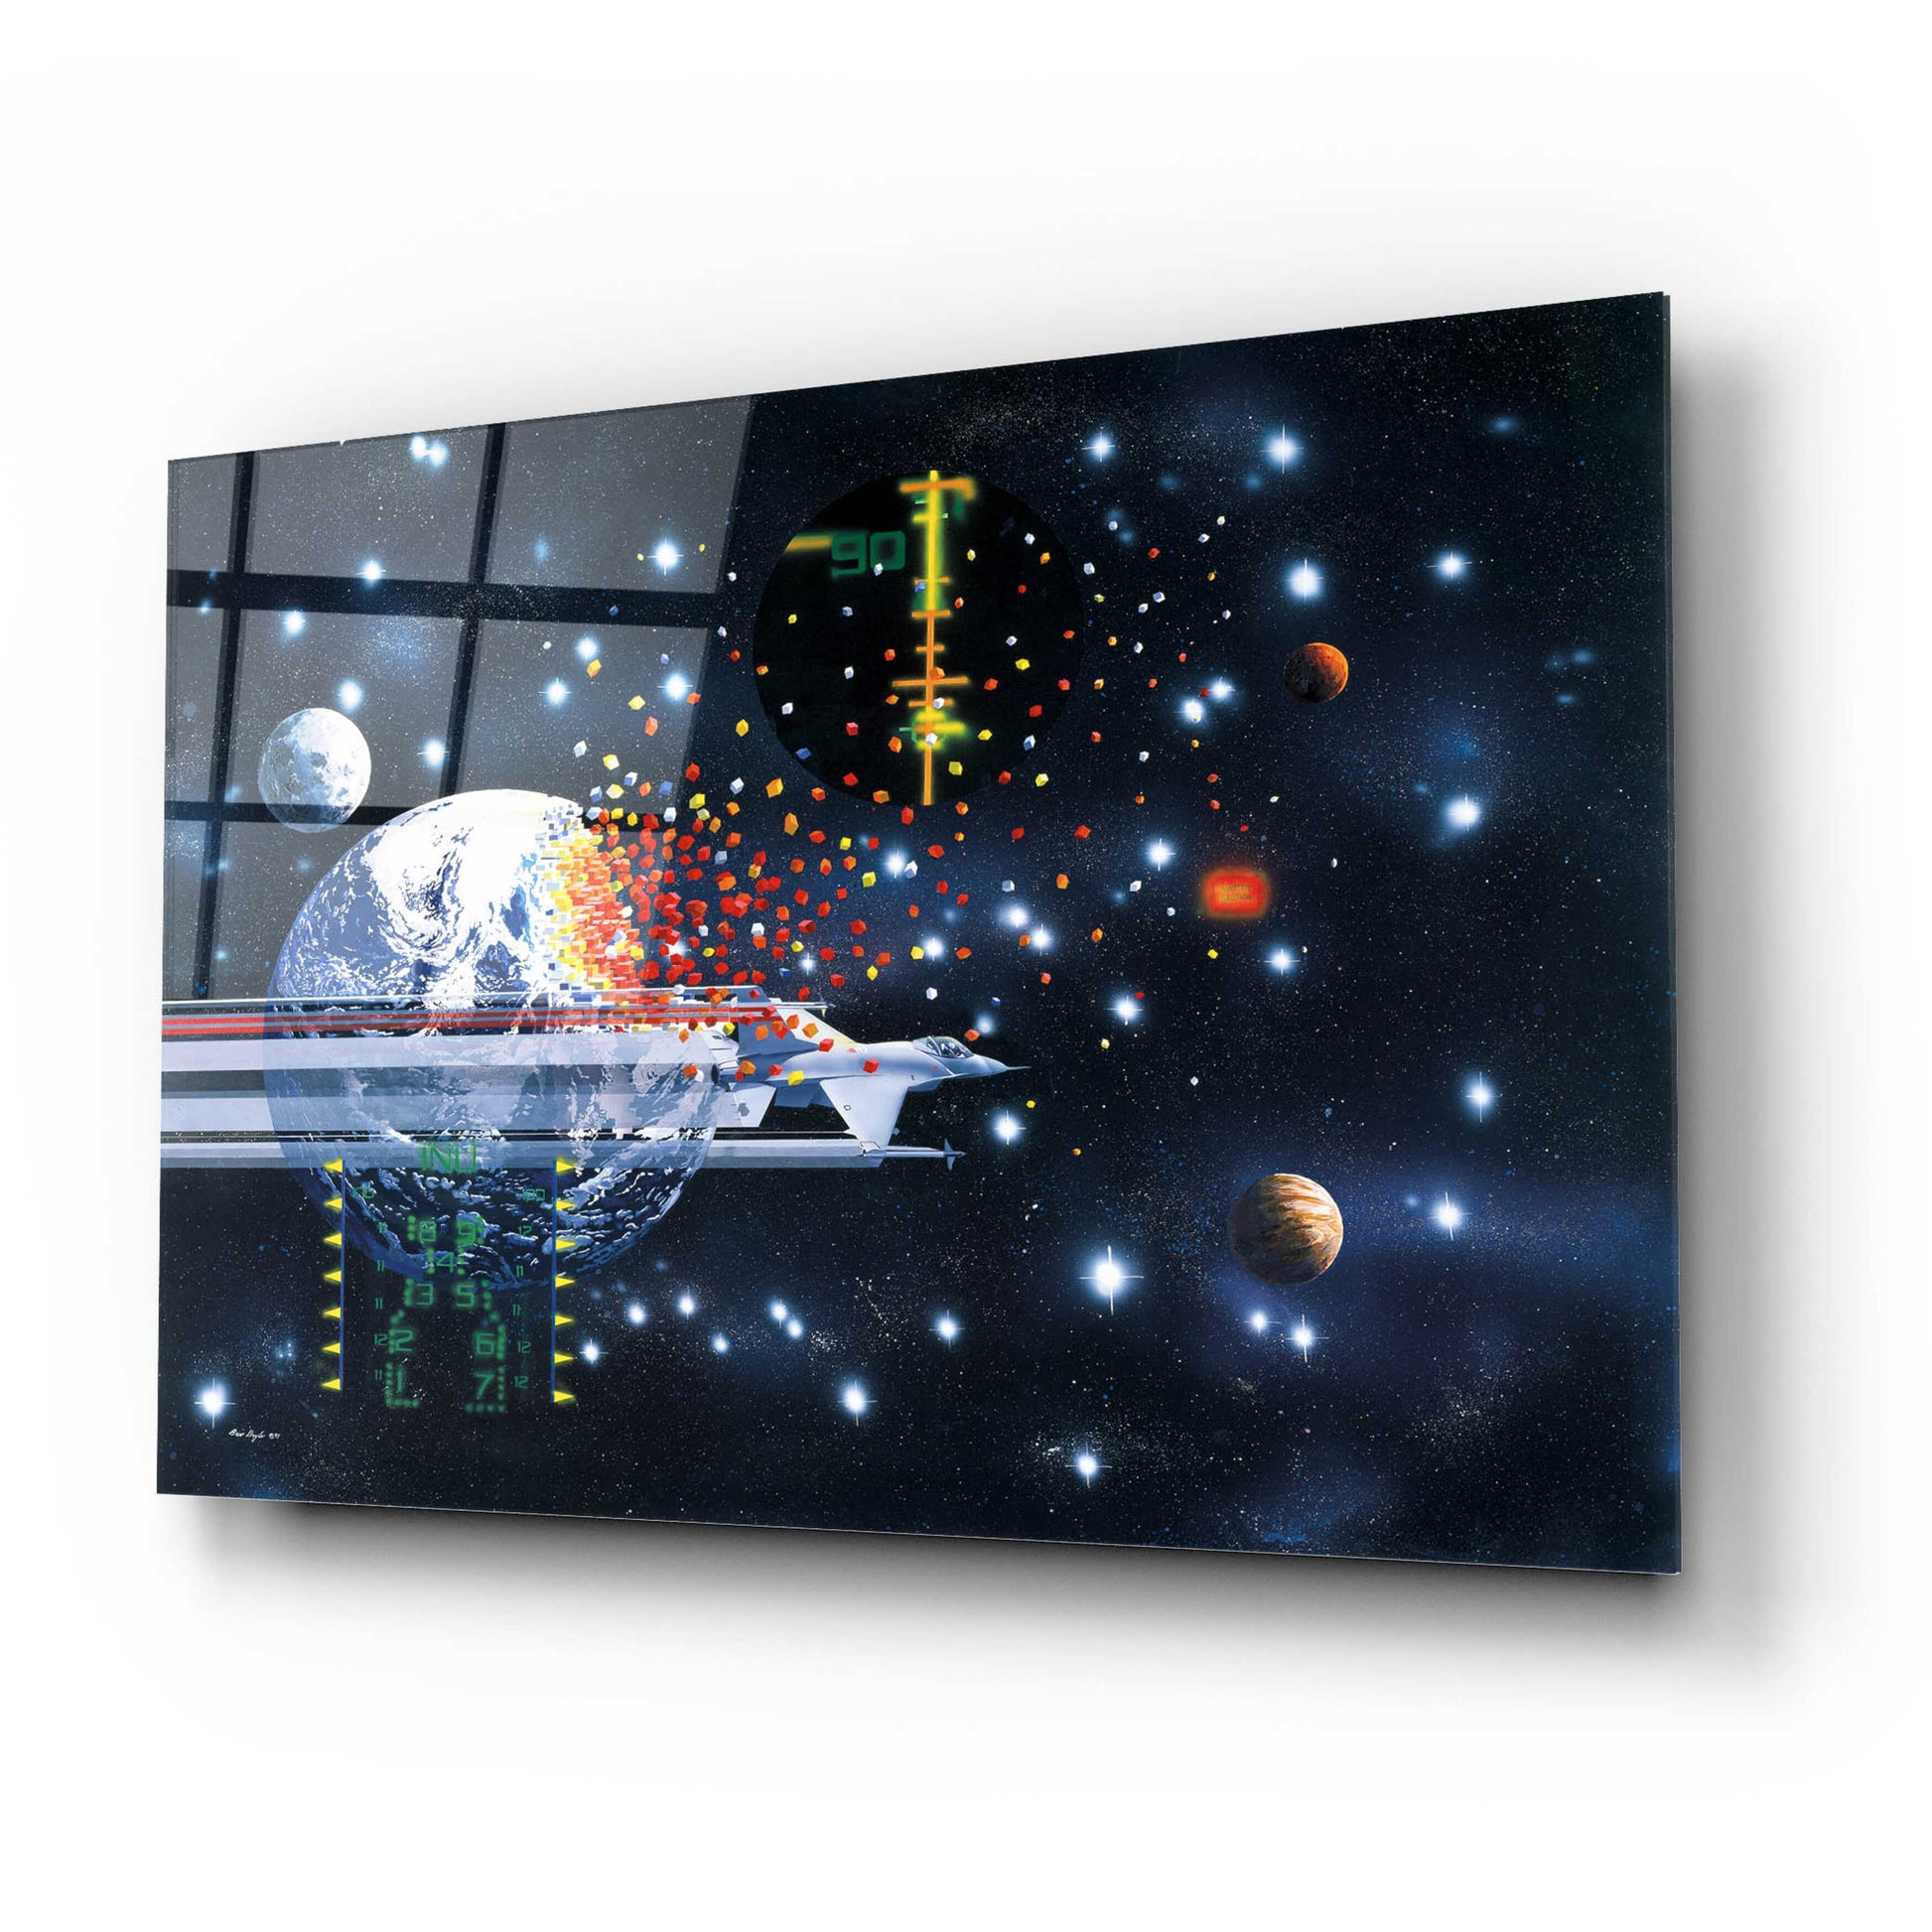 Epic Art 'Conquering Space' by Beverly Doyle, Acrylic Glass Wall Art,24x16